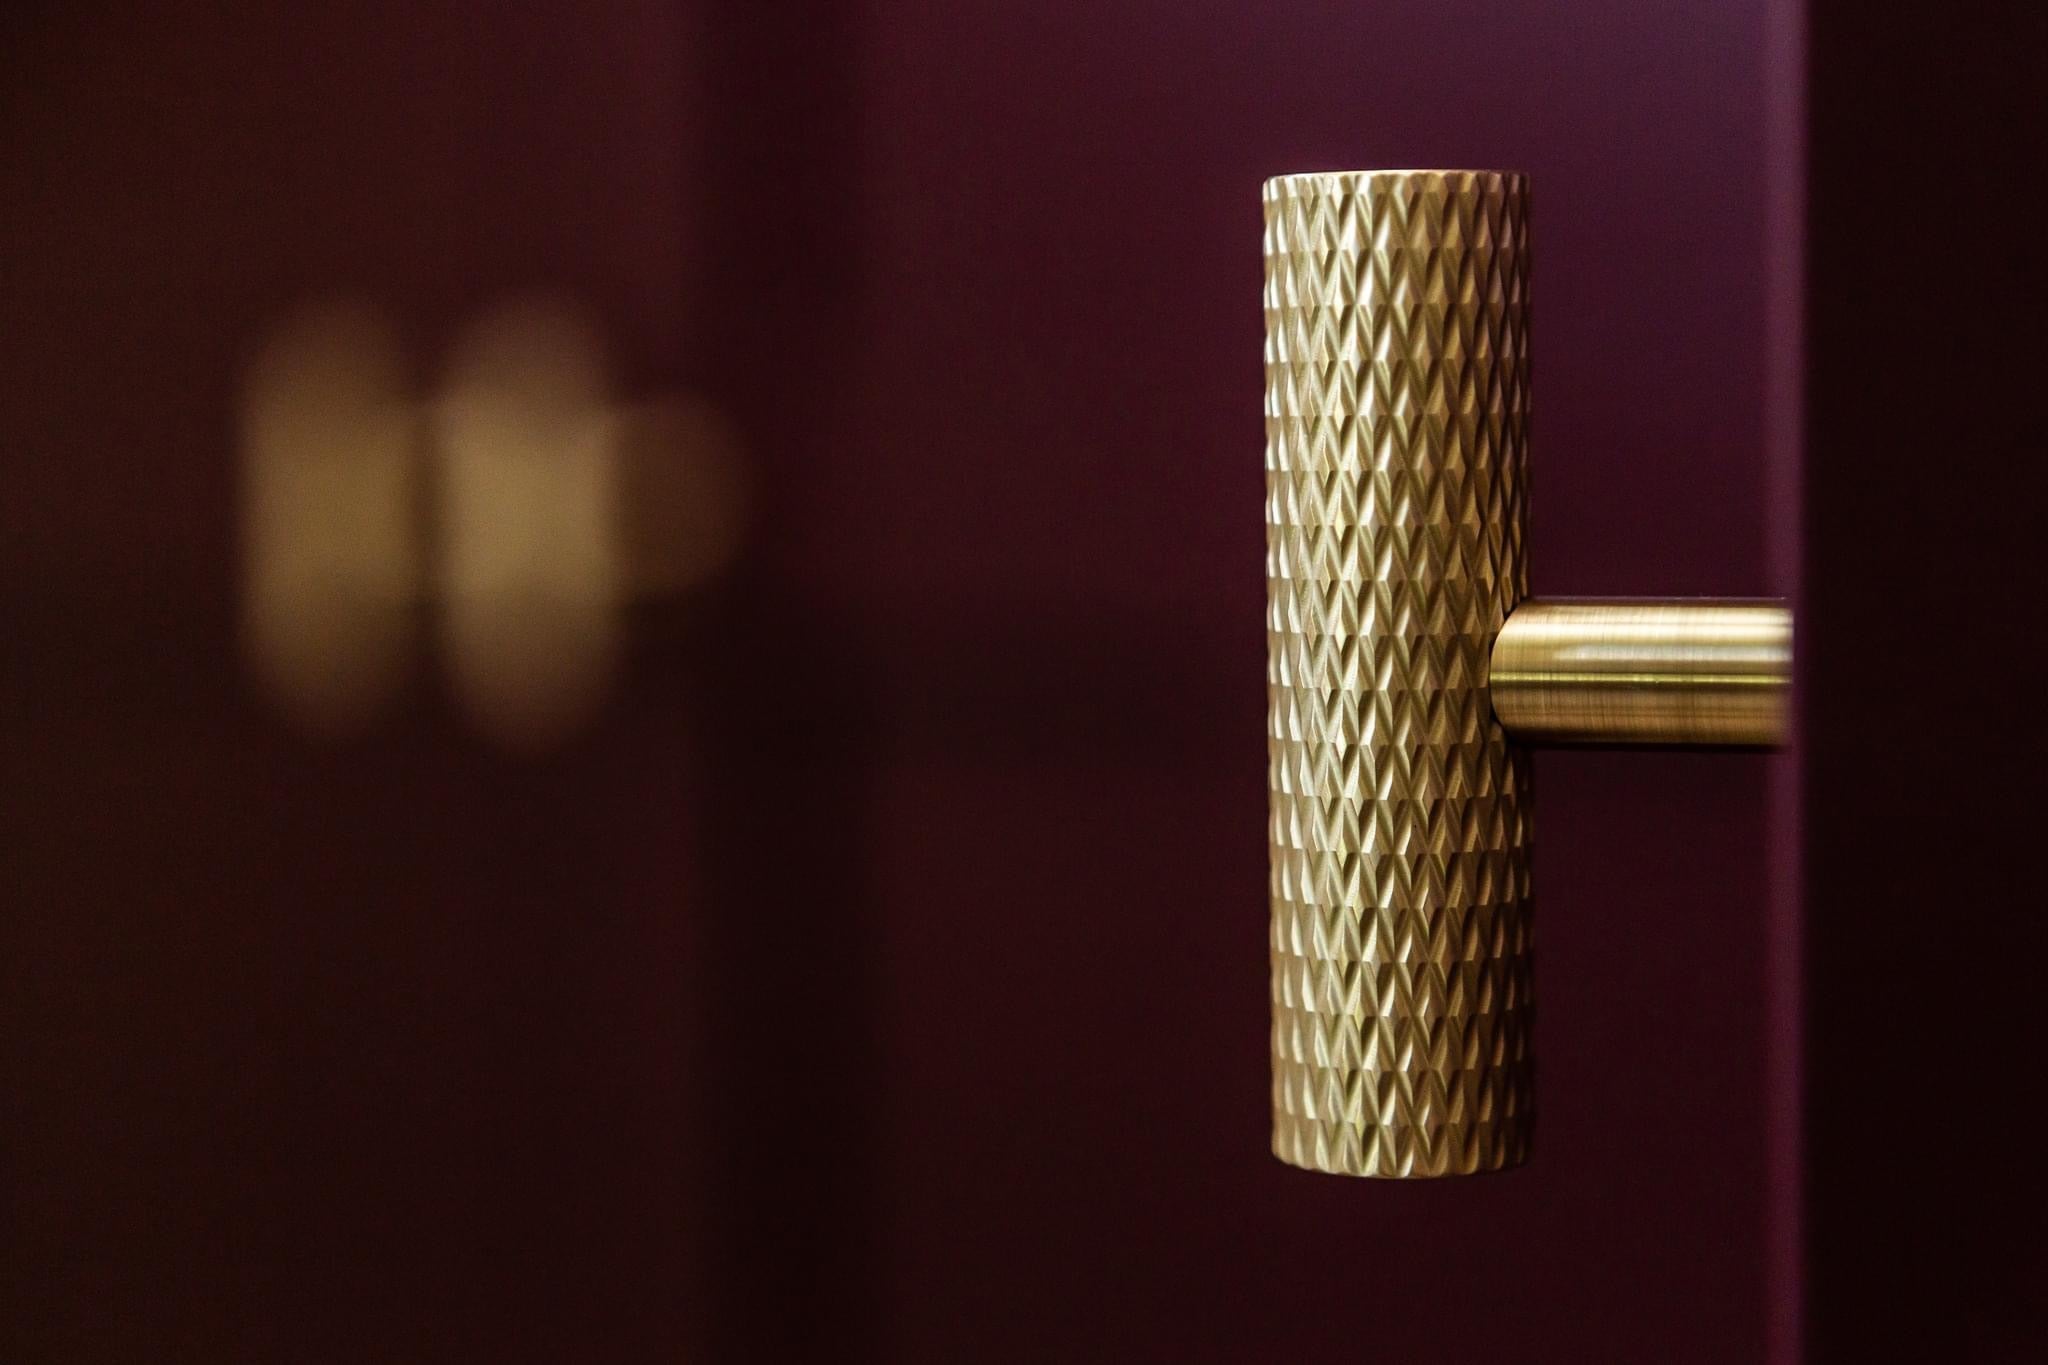 pete hill designs, wokingham, london. round t-bar with knurling in satin brass on red wardrobe cabinetry 